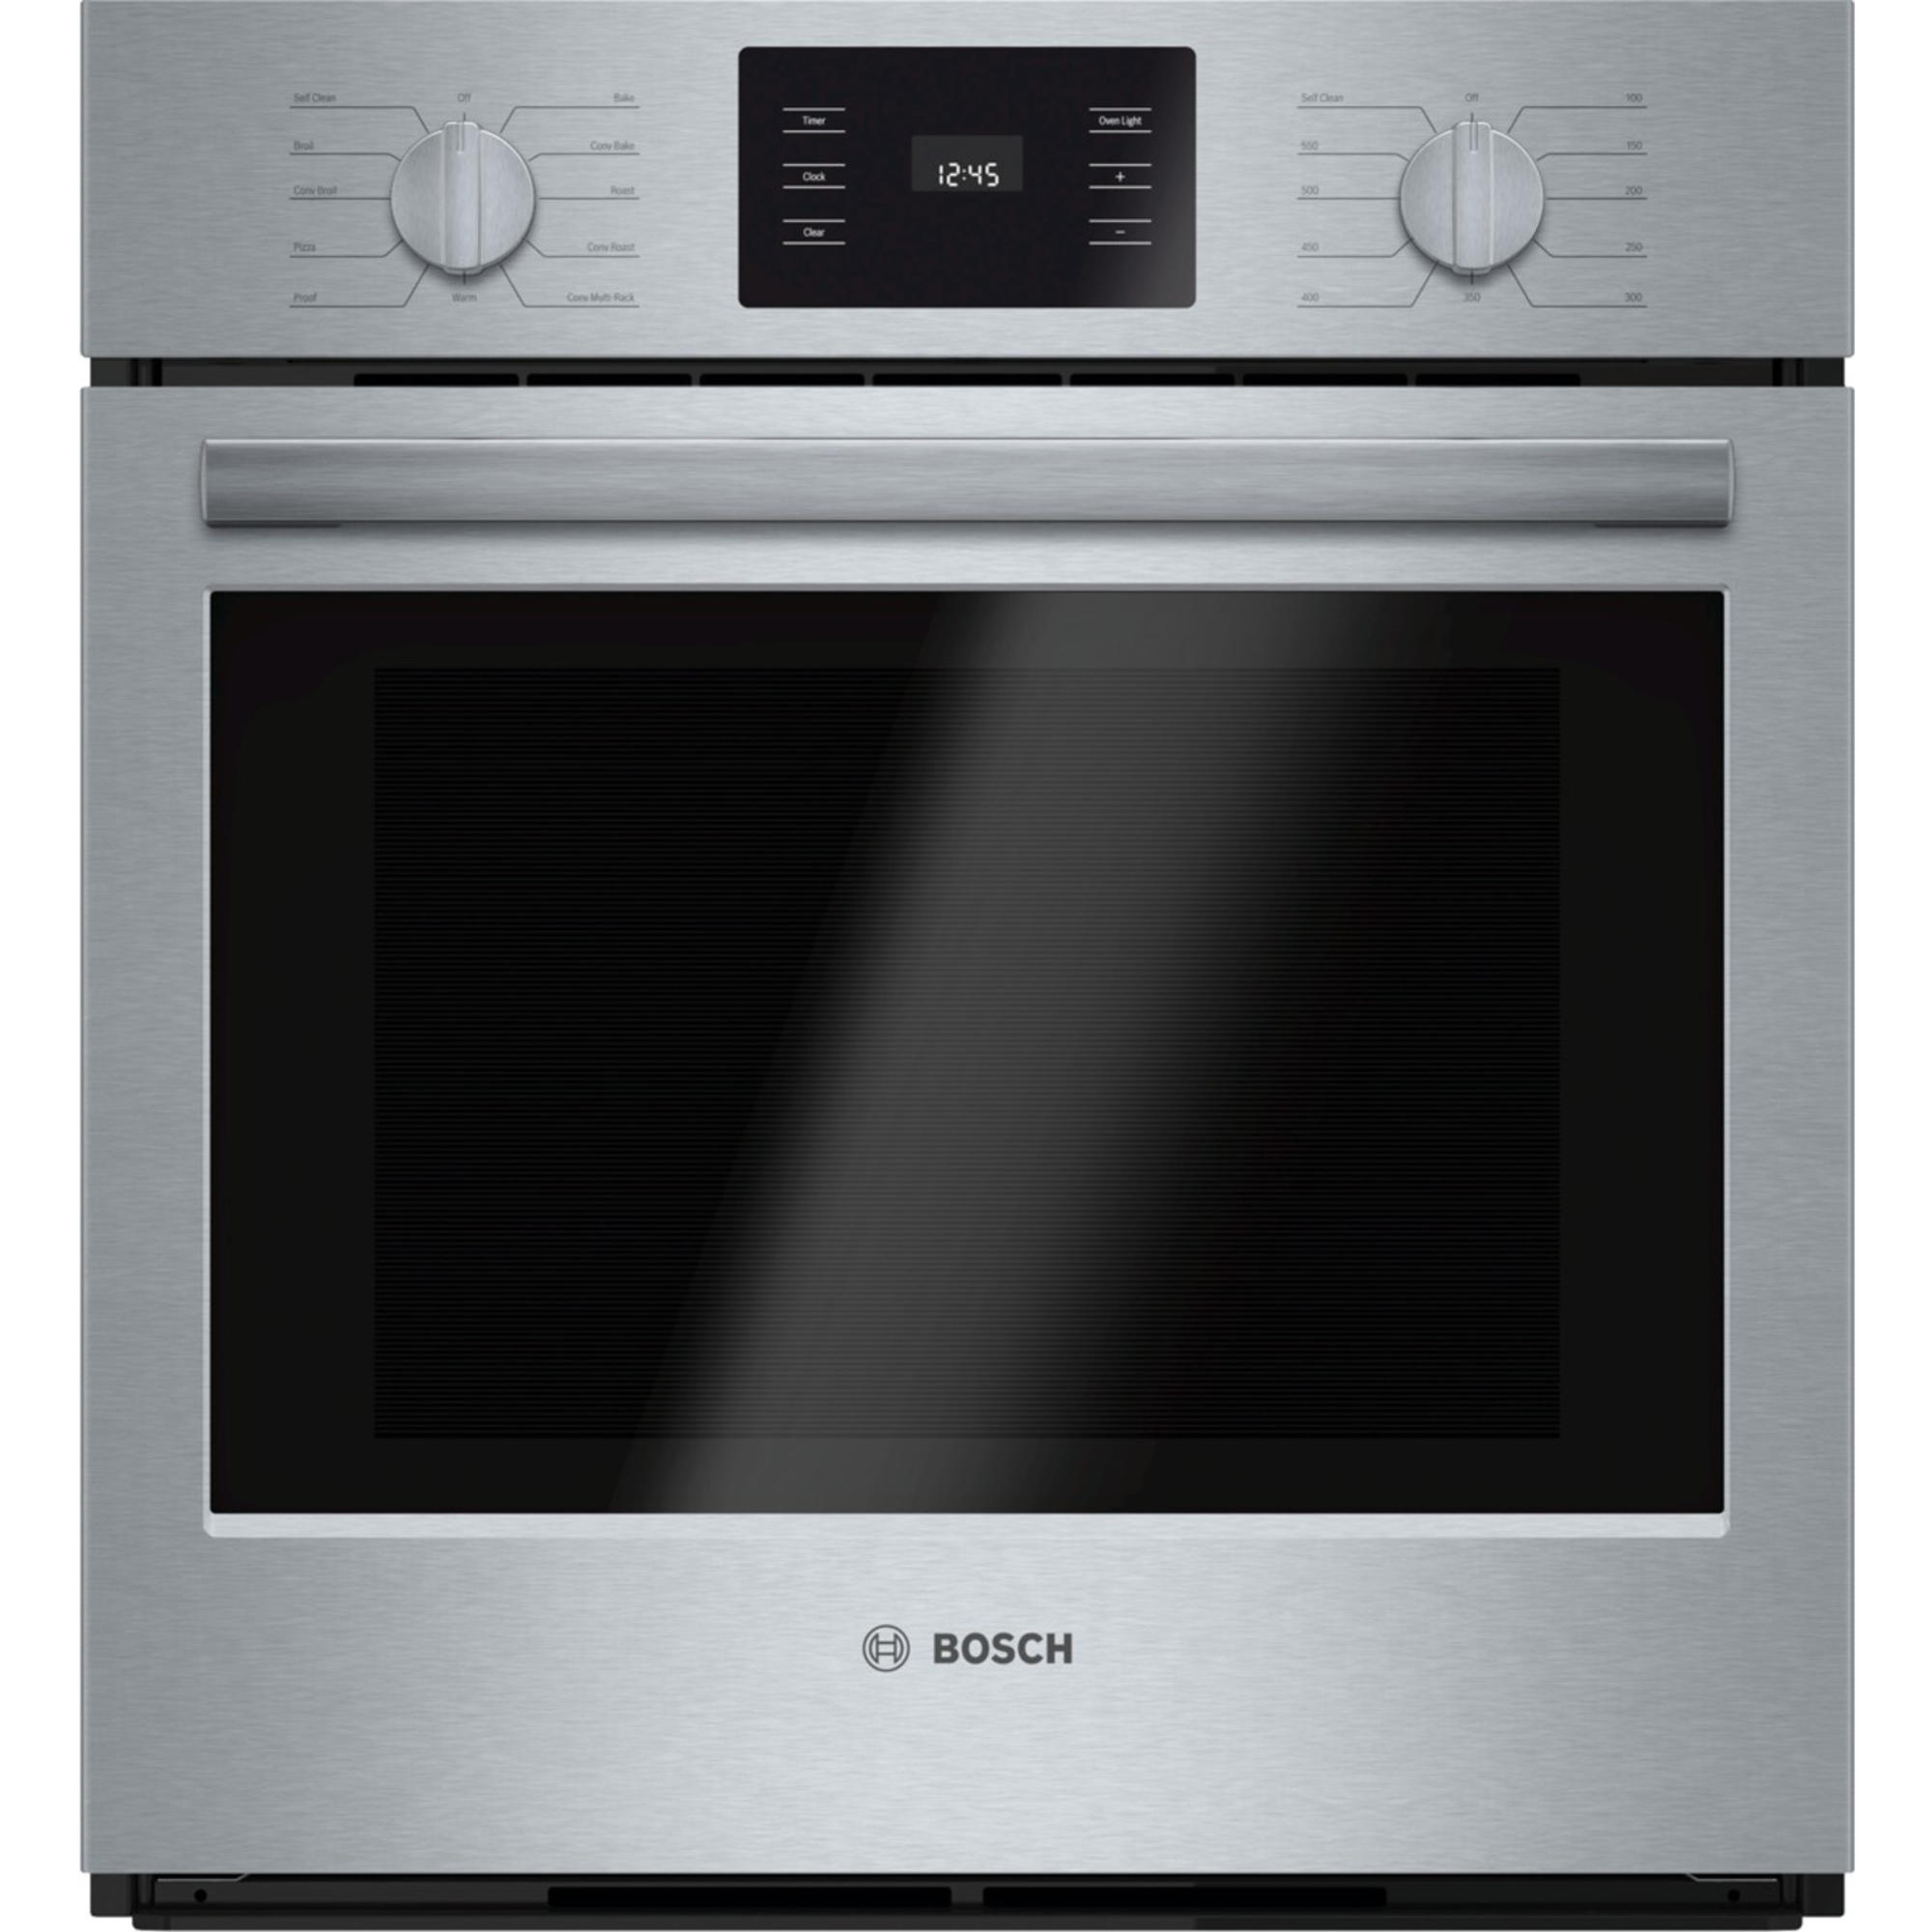 0825225907039 - HBN5451UC 27 500 SERIES SINGLE WALL OVEN W/ CONVECTION - STAINLESS STEEL